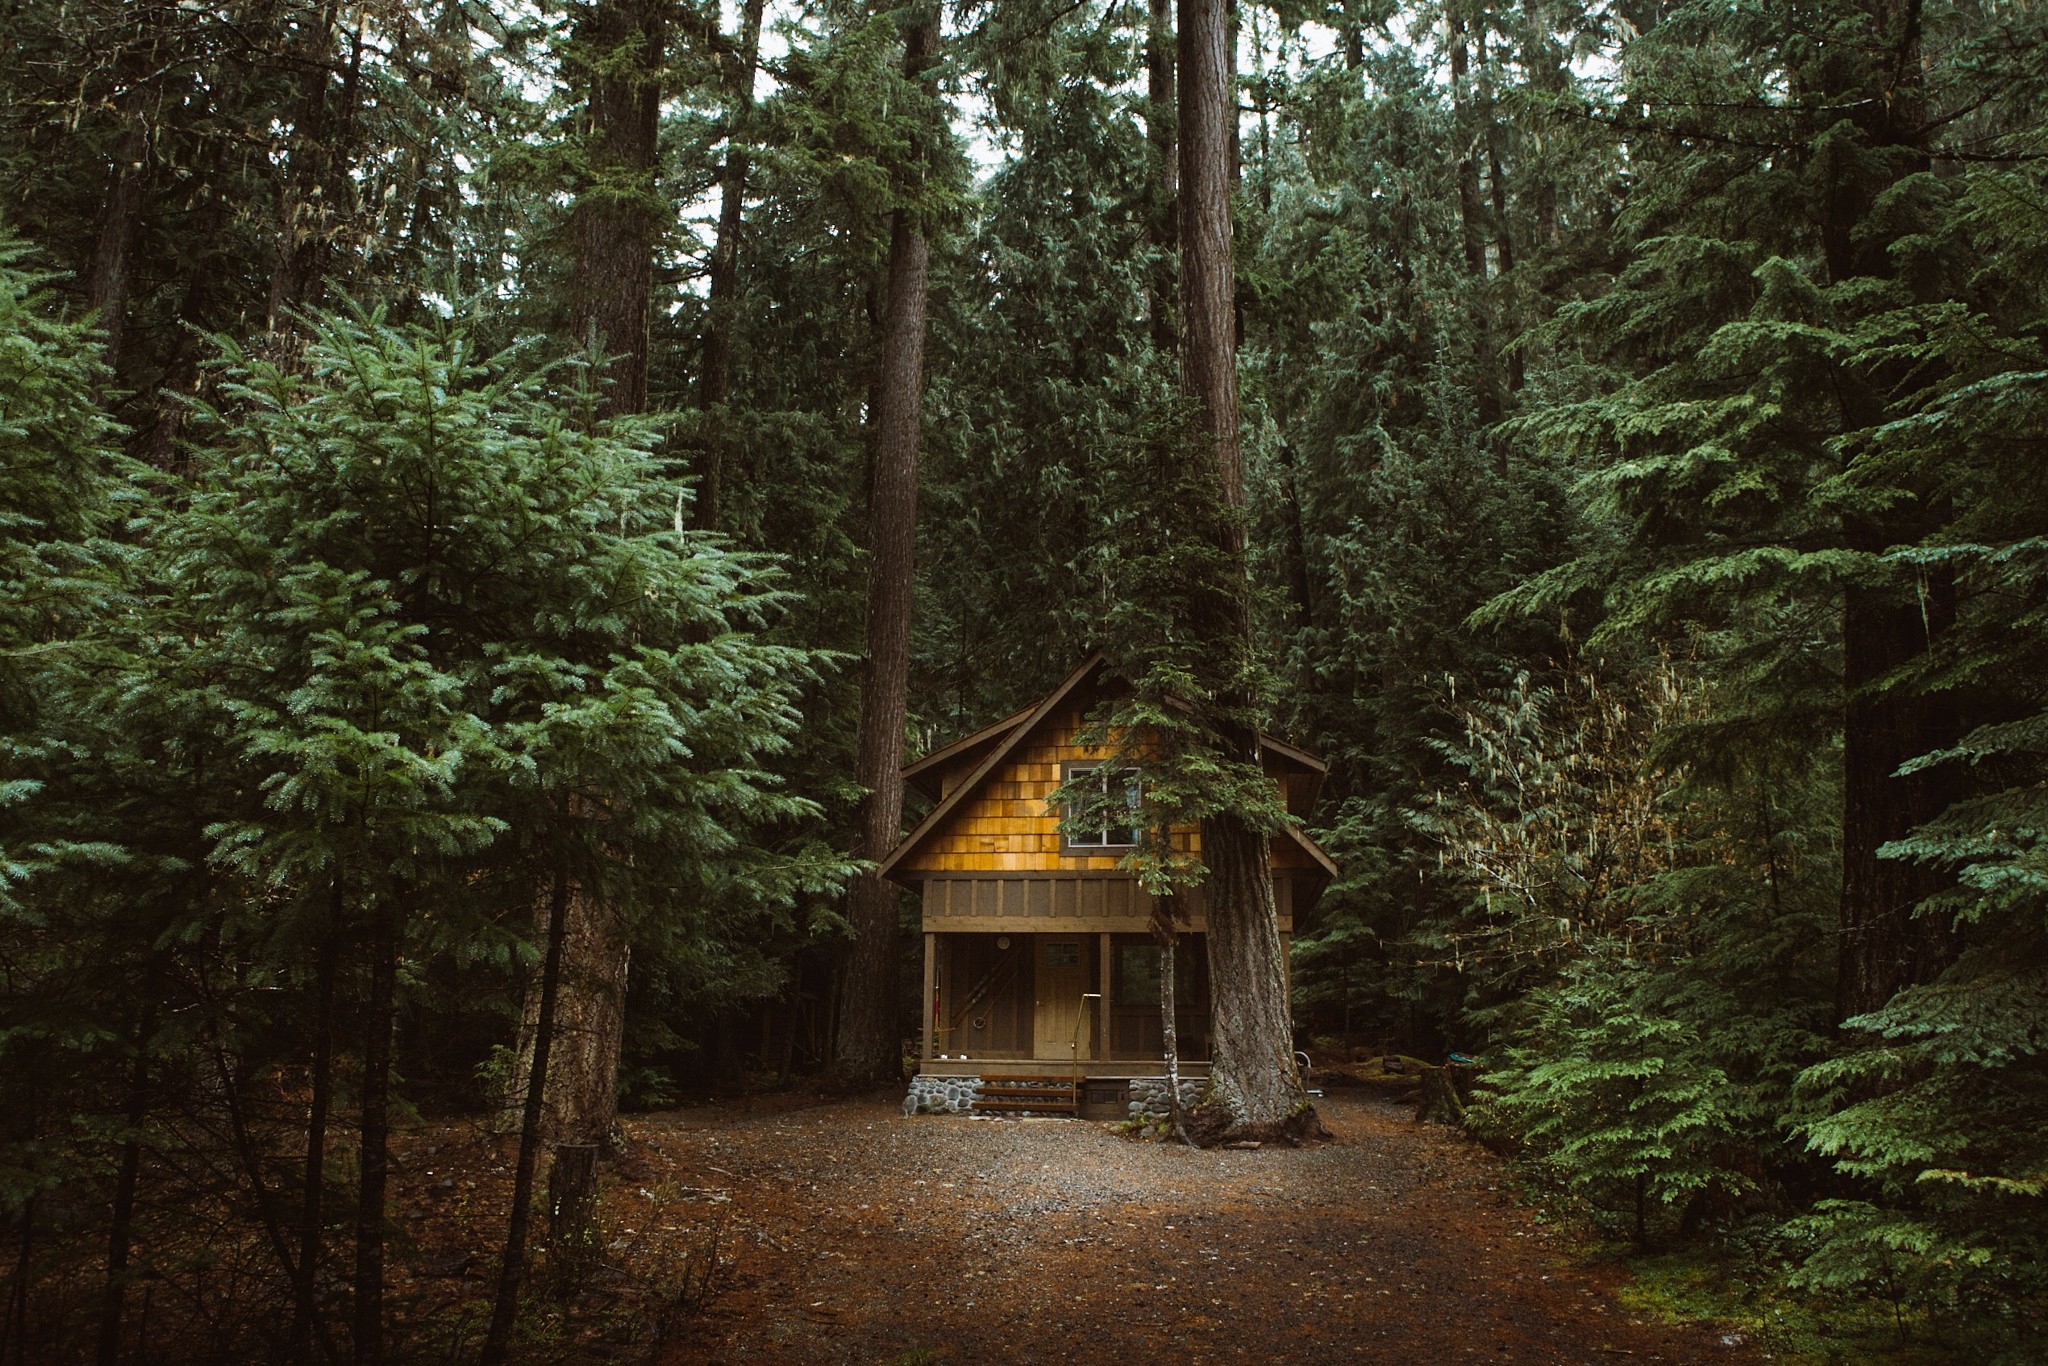 General 2048x1366 forest nature cabin trees